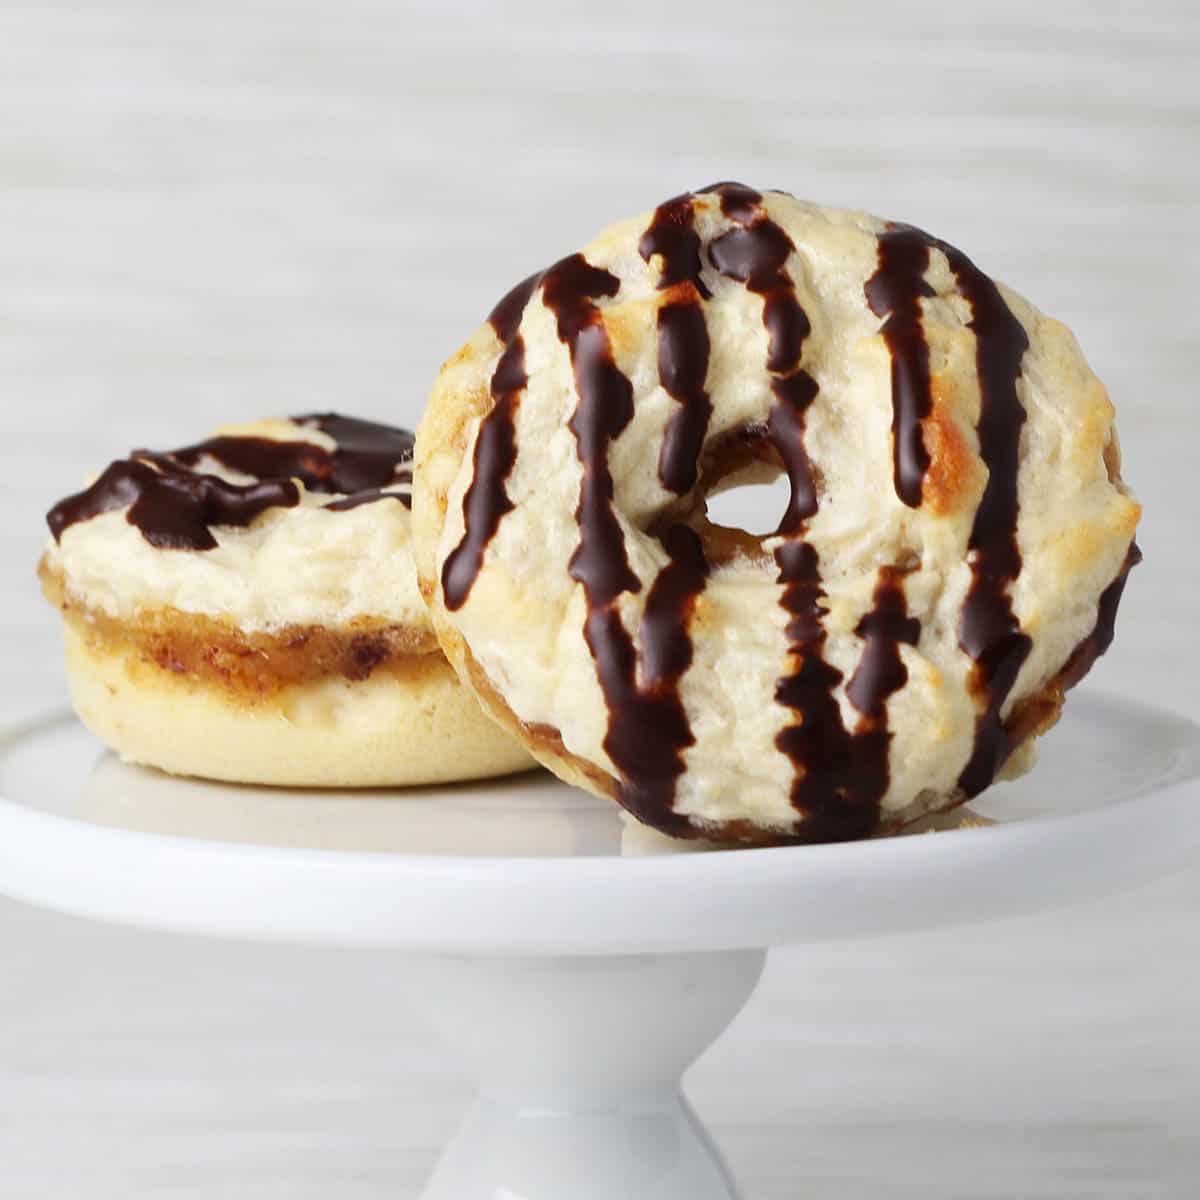 two mini donuts with chocolate drizzle on a small white cupcake stand